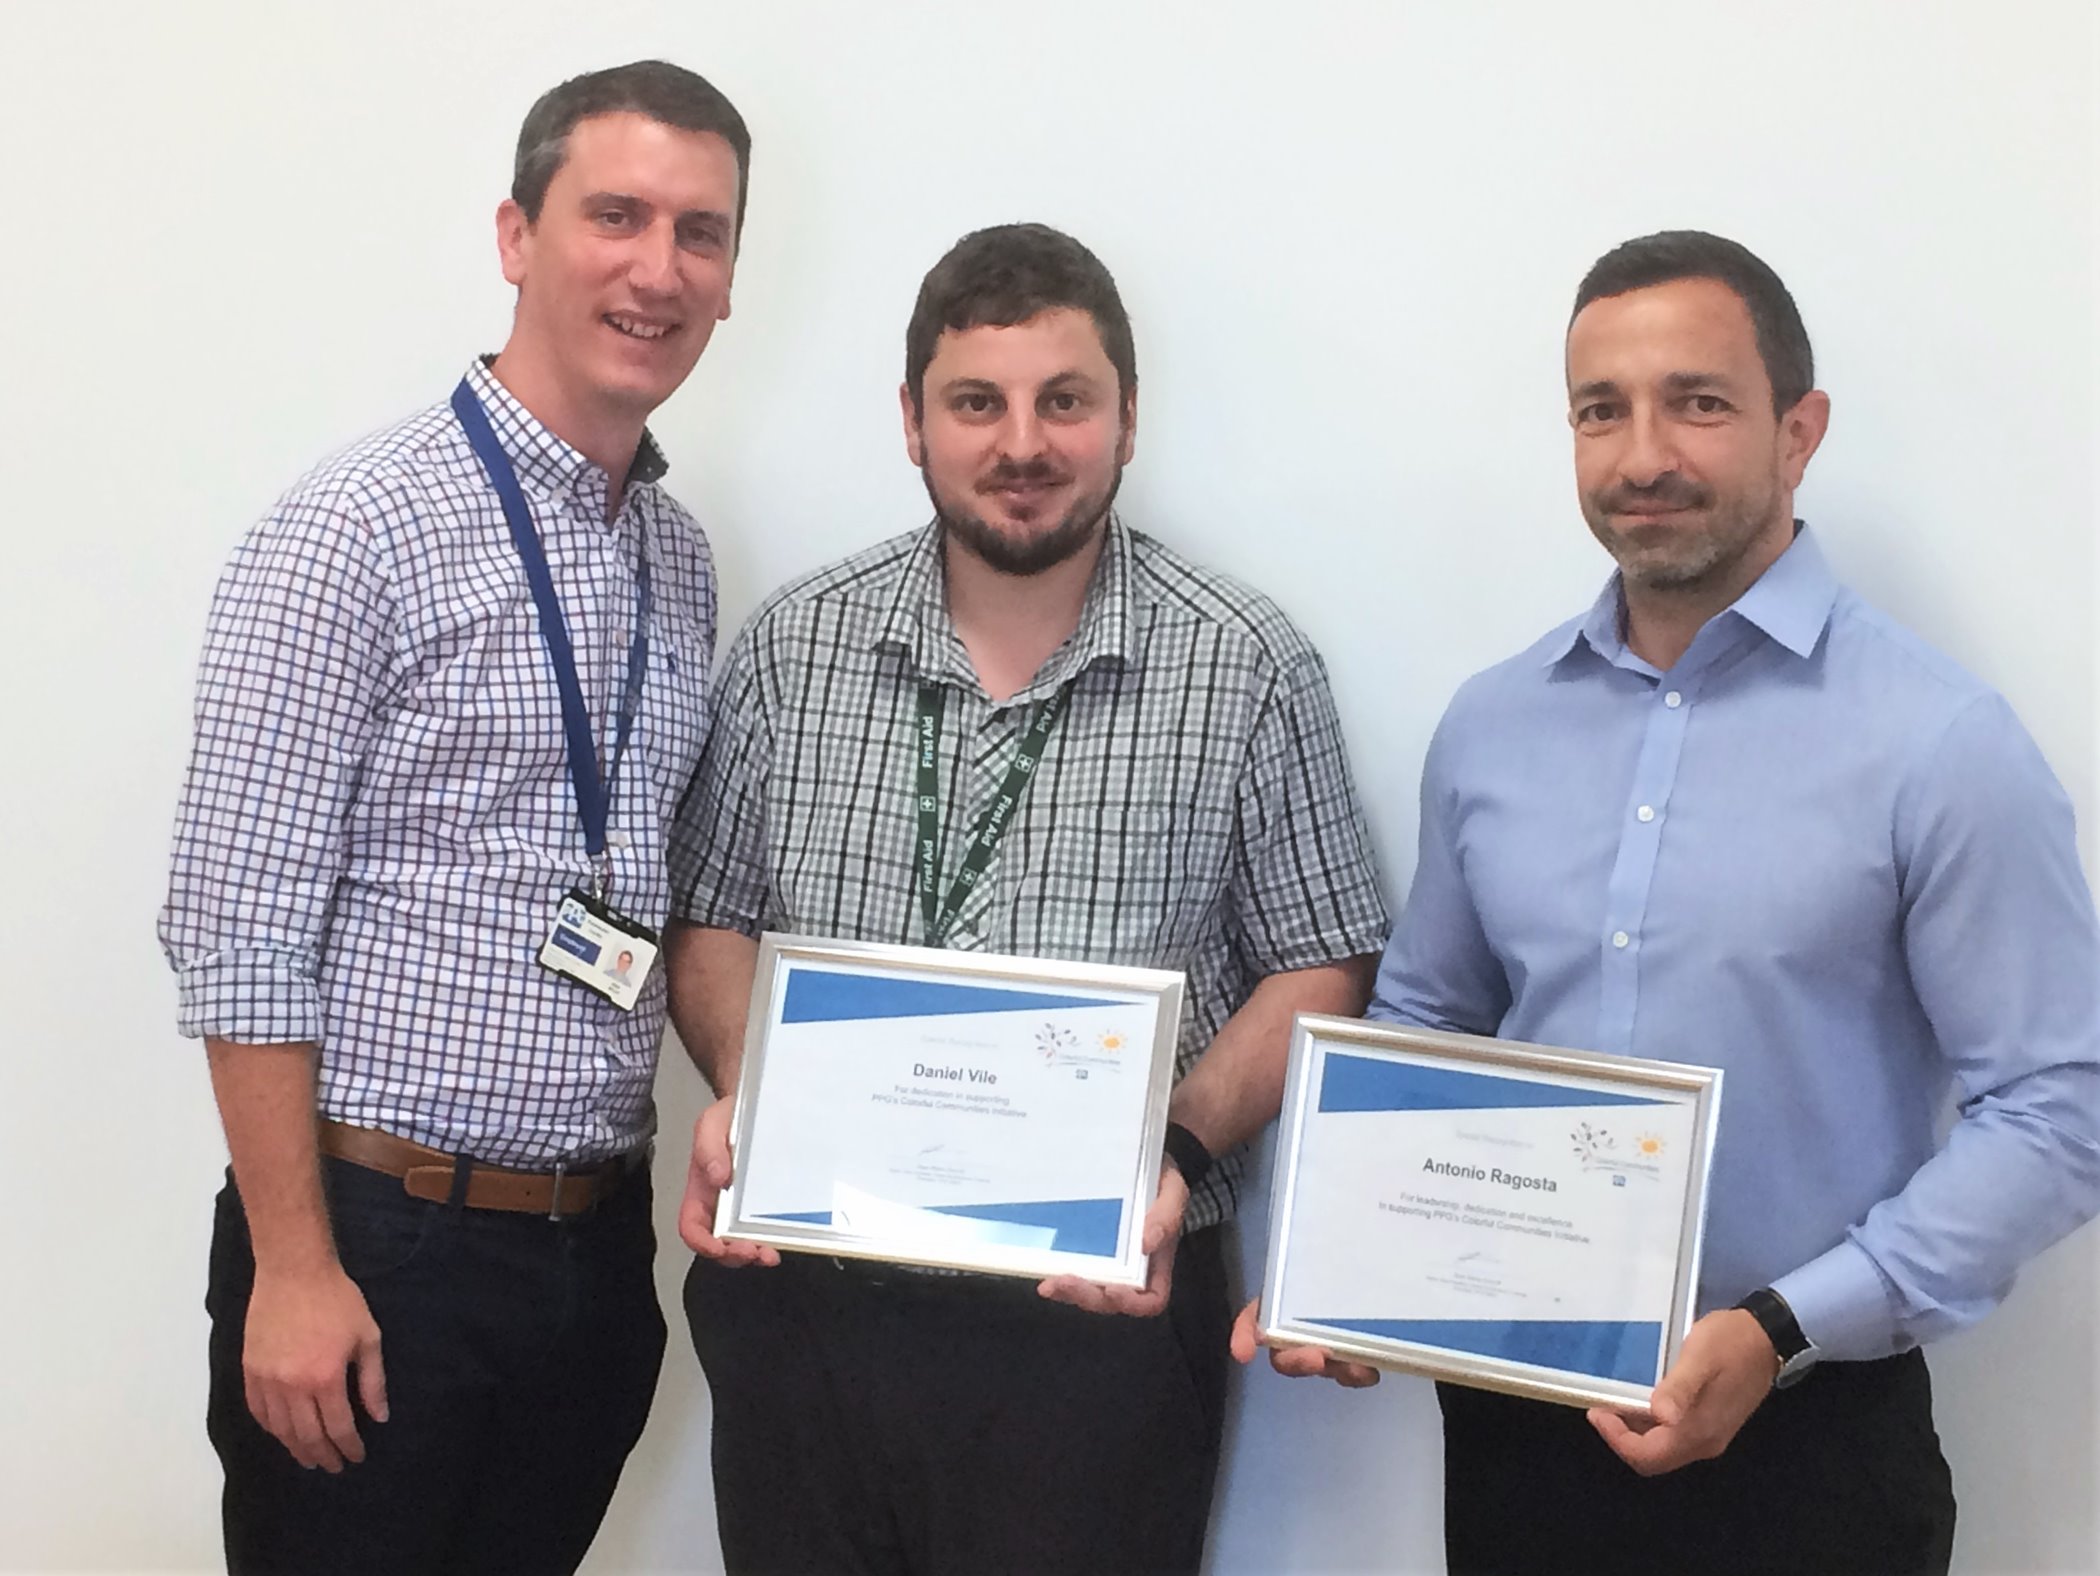 Tony and Daniel Roll Up Their Sleeves to Help Community | PPG People